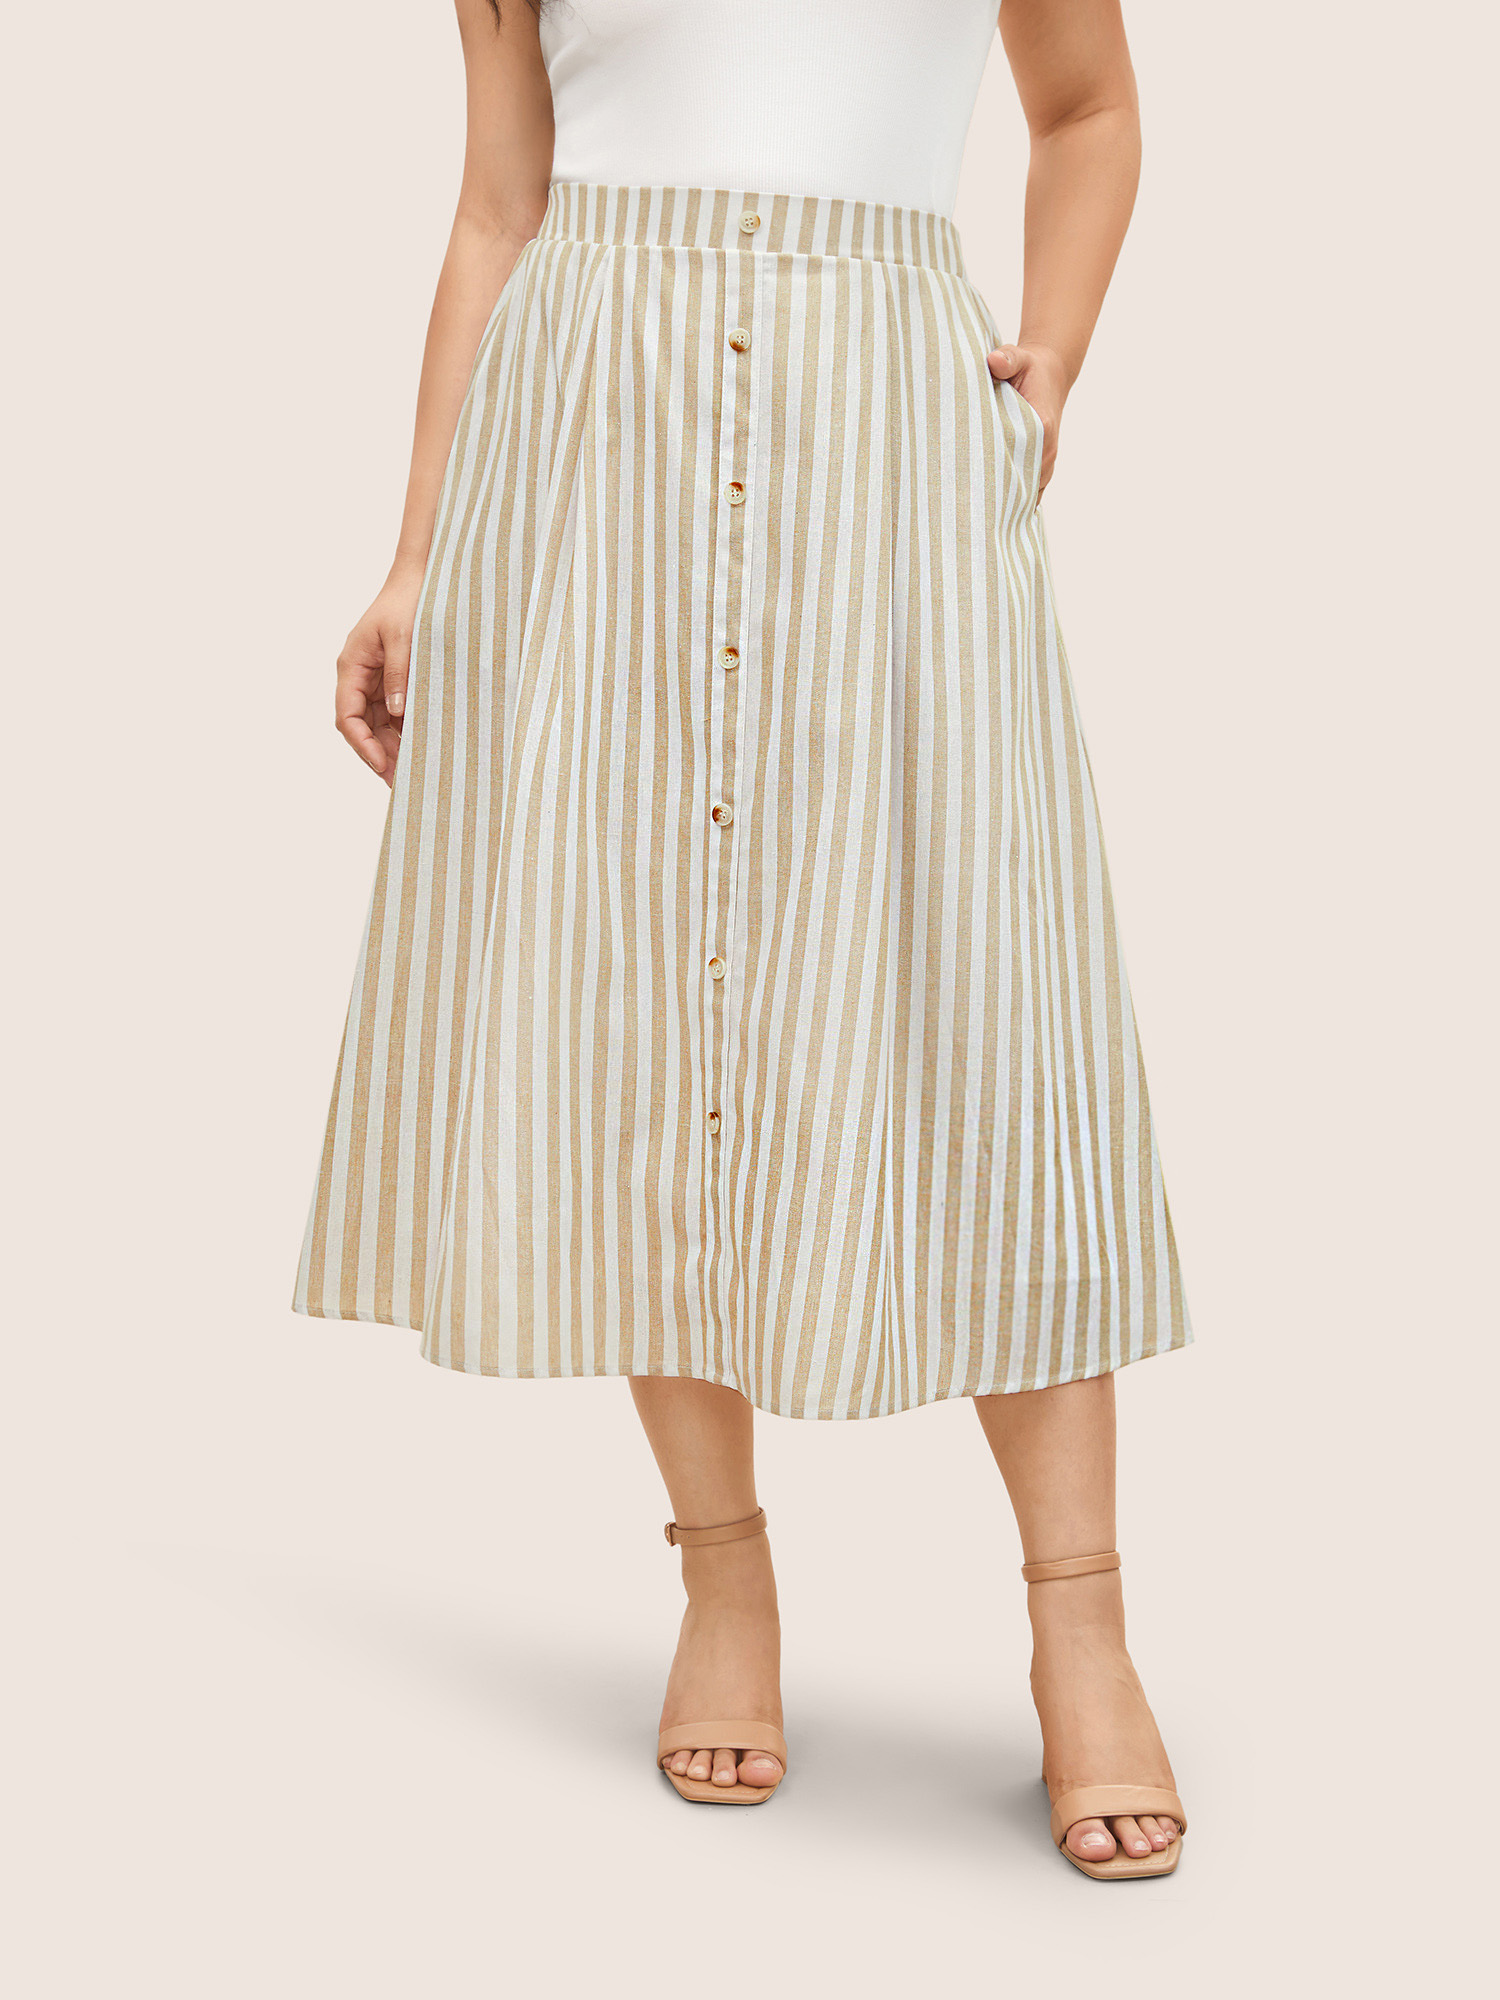 

Plus Size Stripes Elastic Waist Button Detail Pocket Skirt Women Apricot Work From Home Button No stretch Slanted pocket Work Skirts BloomChic